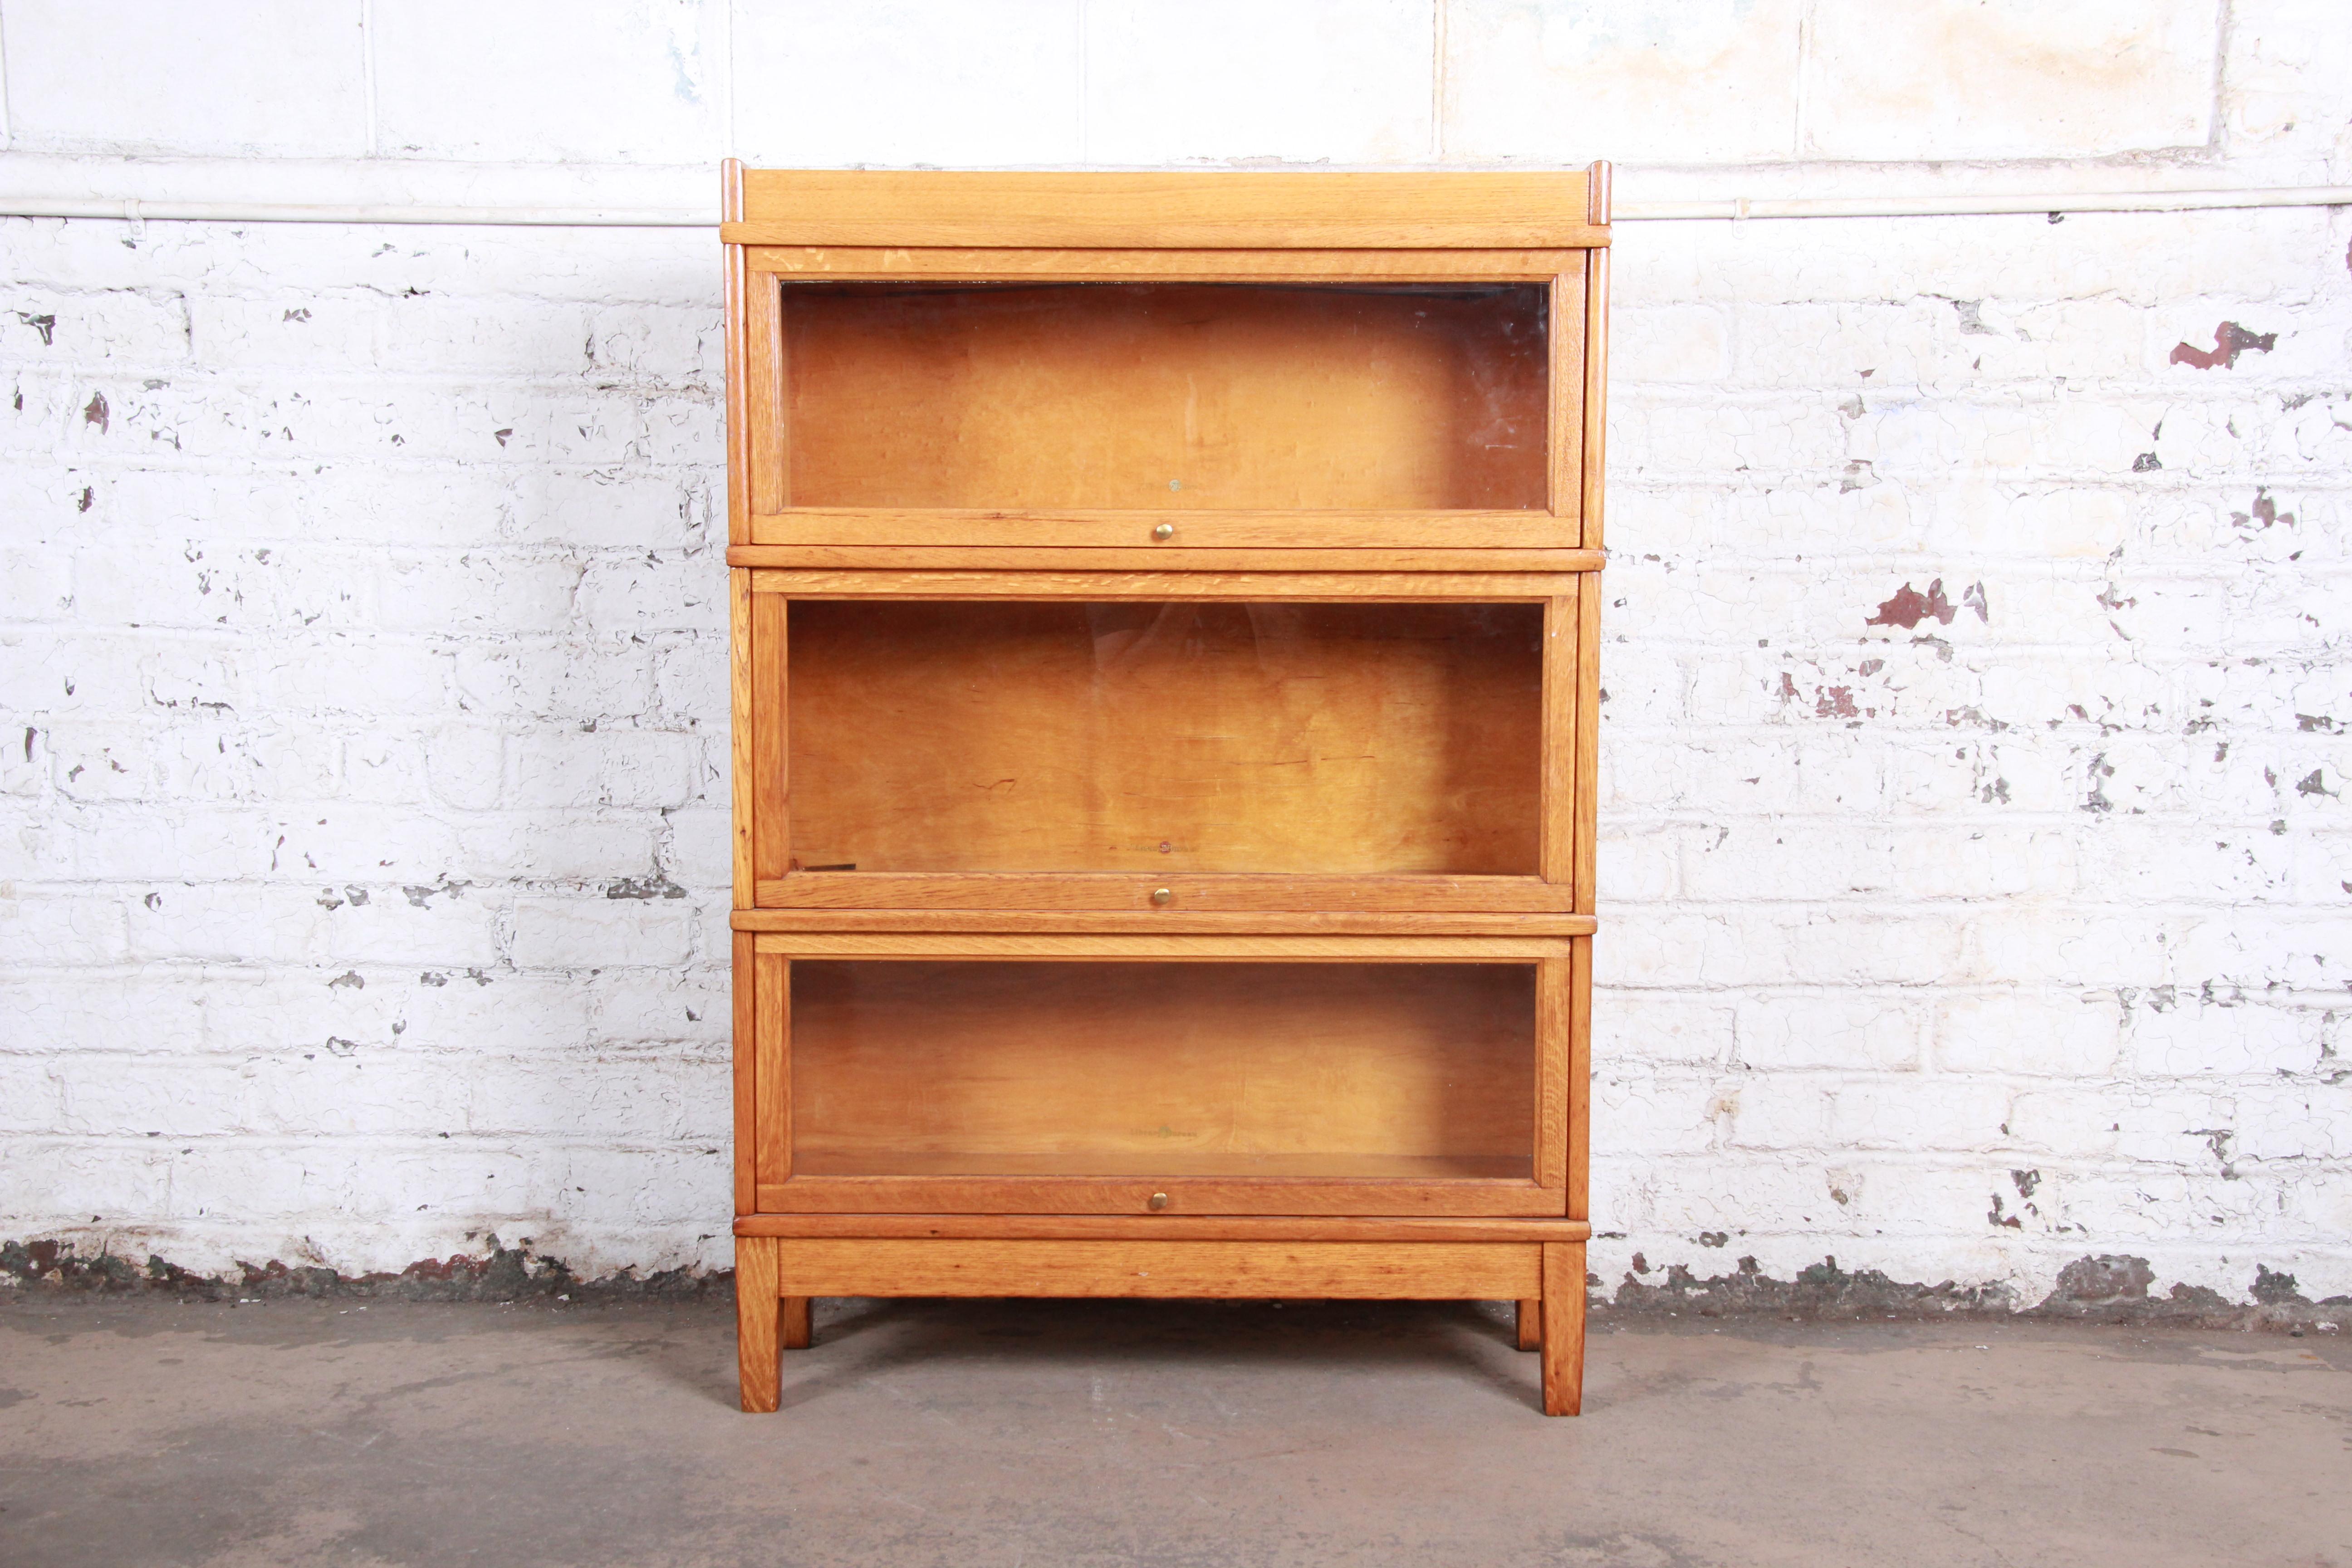 Antique oak three-stack barrister bookcase

Made by Library Bureau

USA, circa 1940s

Tiger oak and brass and glass

Measures: 34.13